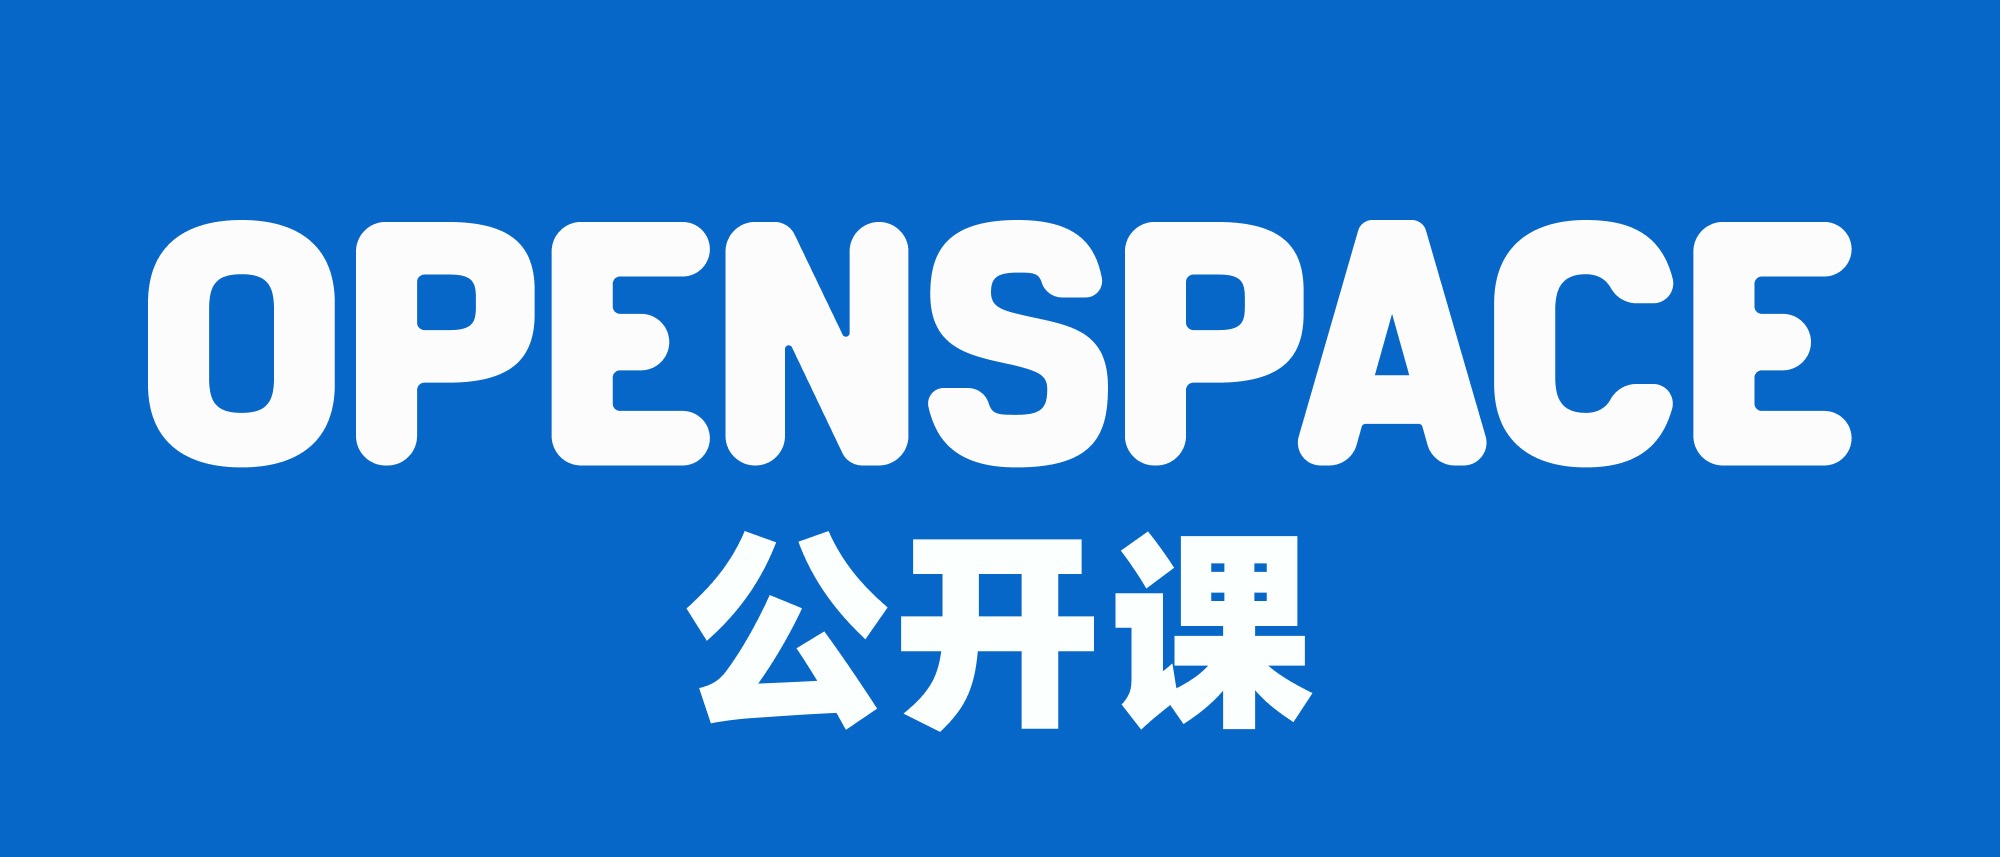 OpenSpace 公开课合集